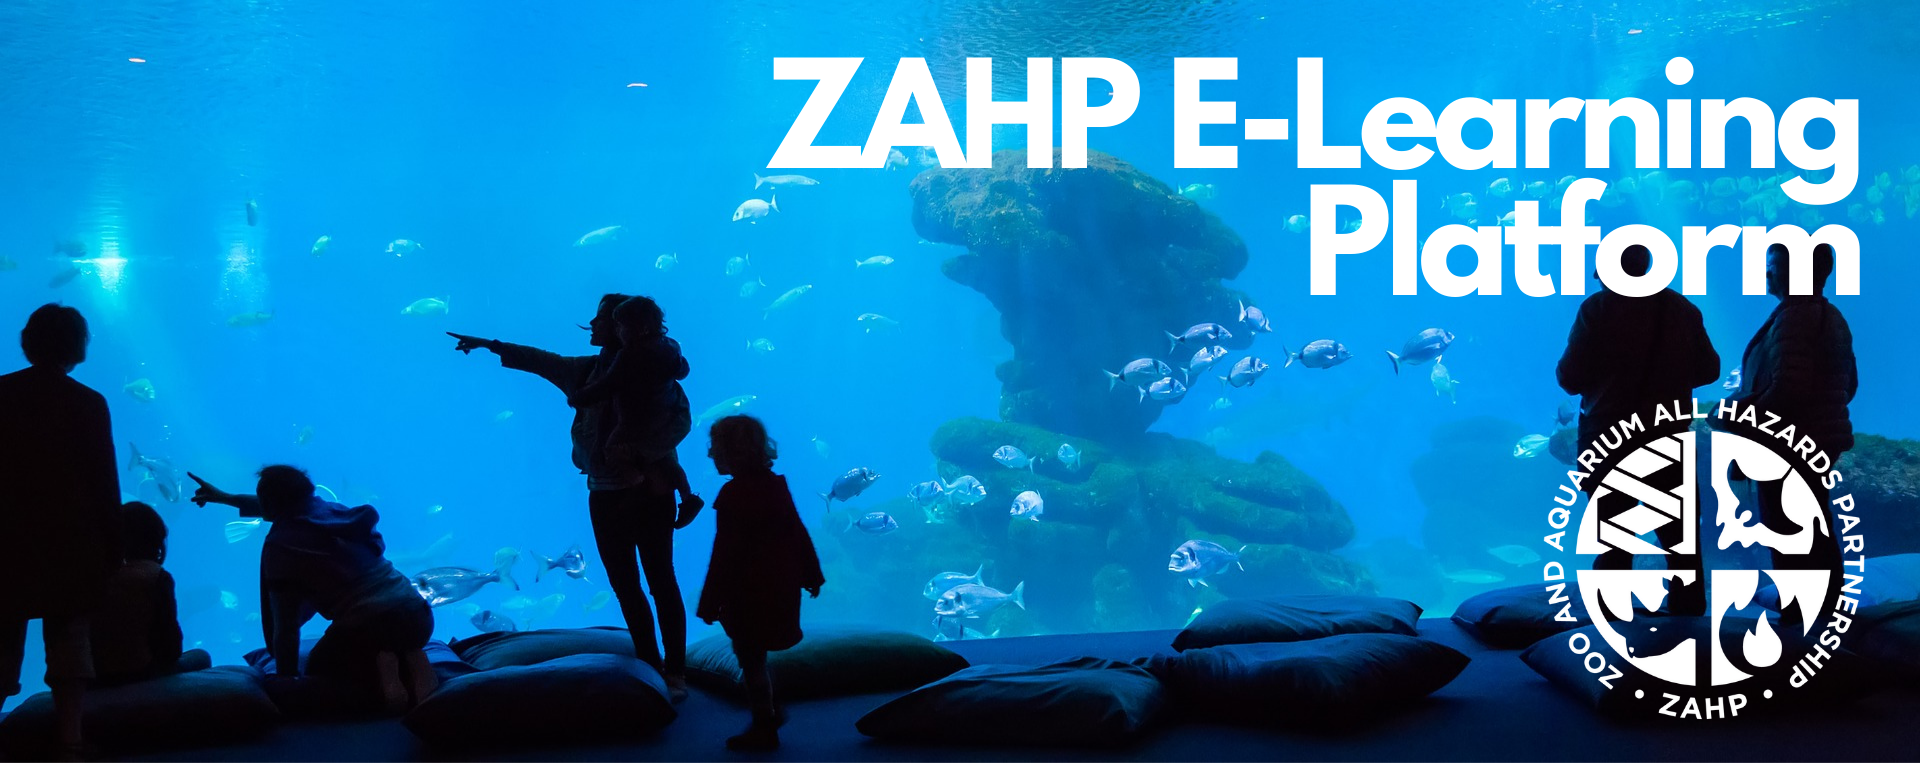 ZAHP Launches New e-Learning Platform